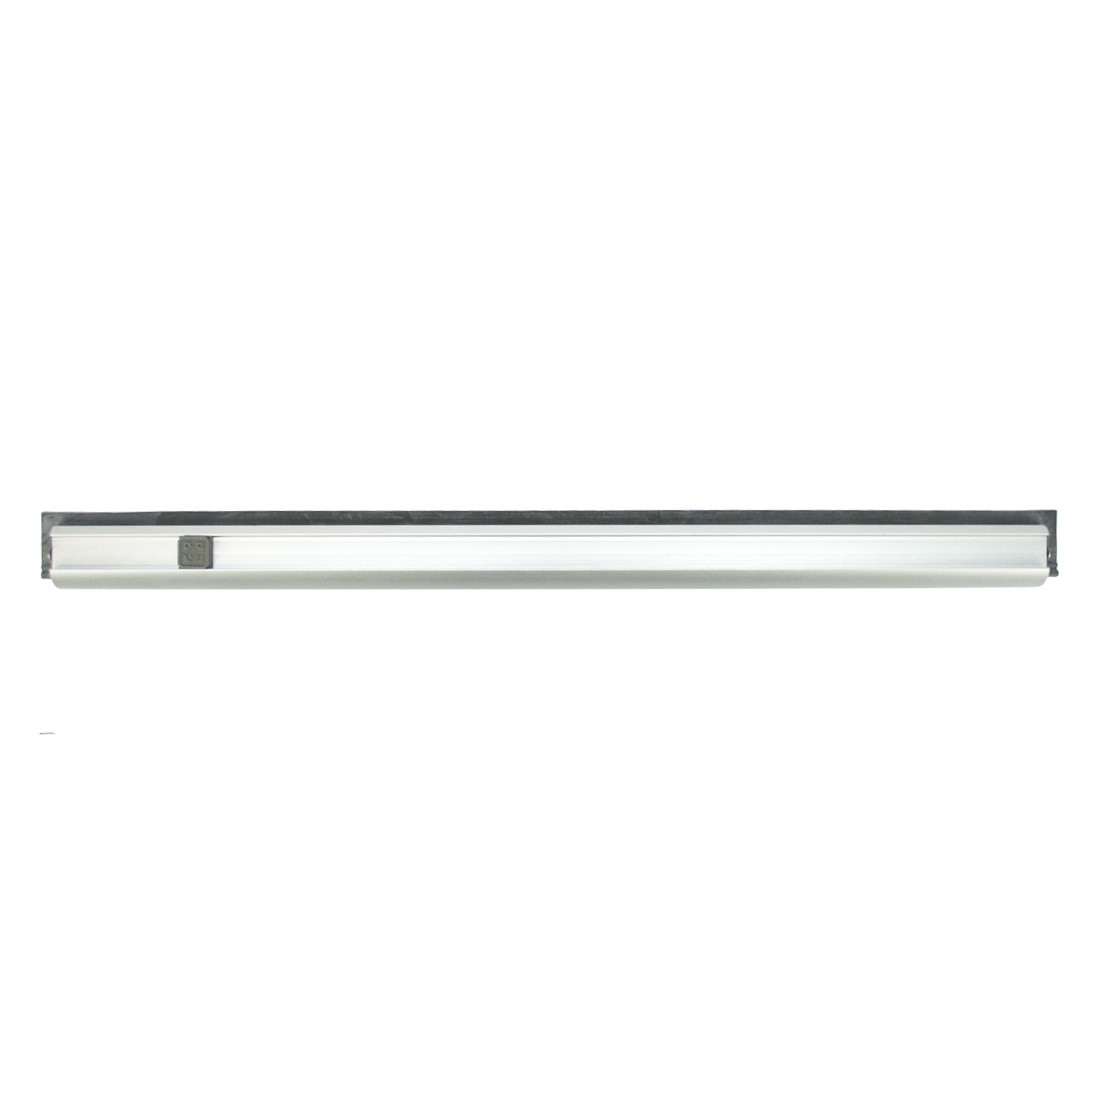 Sorbo Silverado Squeegee Channel Front View